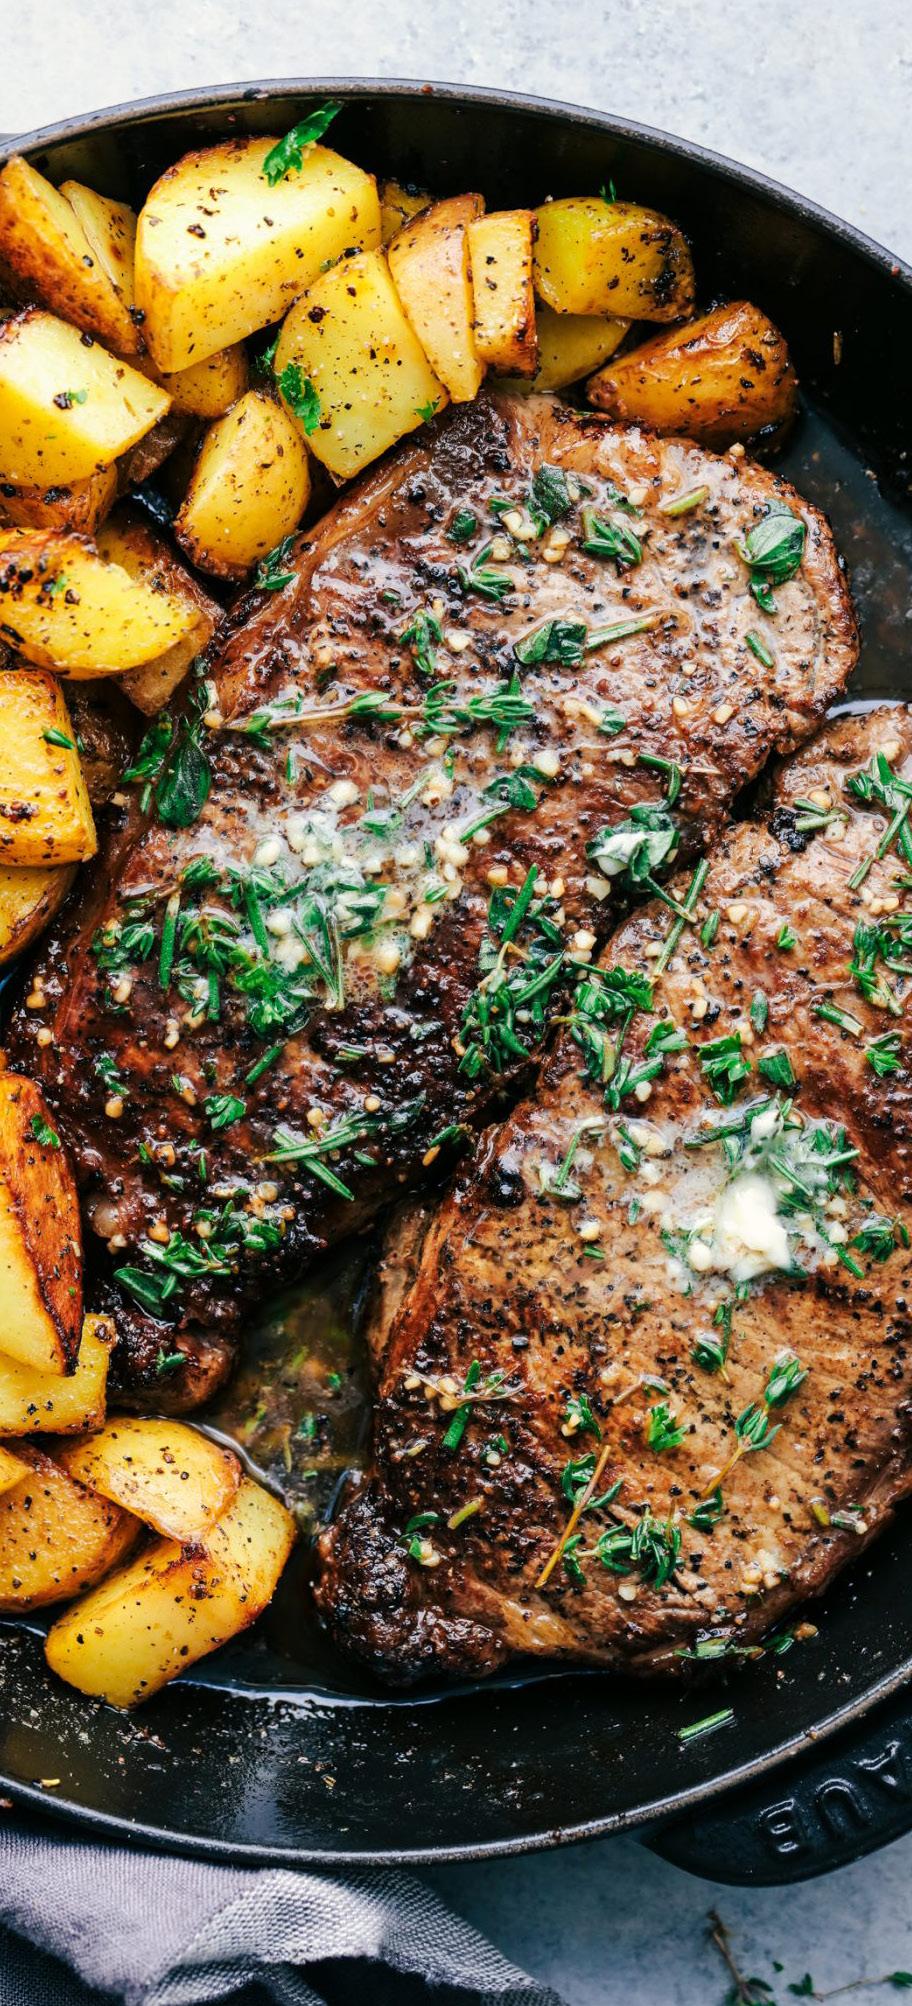 skillet garlic butter herb STEAK & POTATOES PREP TIME 5 MIN COOK TIME 30 MIN TOTAL TIME 35 MIN SERVES 4 1 tablespoon olive oil 1 tablespoon butter 1 pound yukon gold potatoes, sliced about ½ inch in